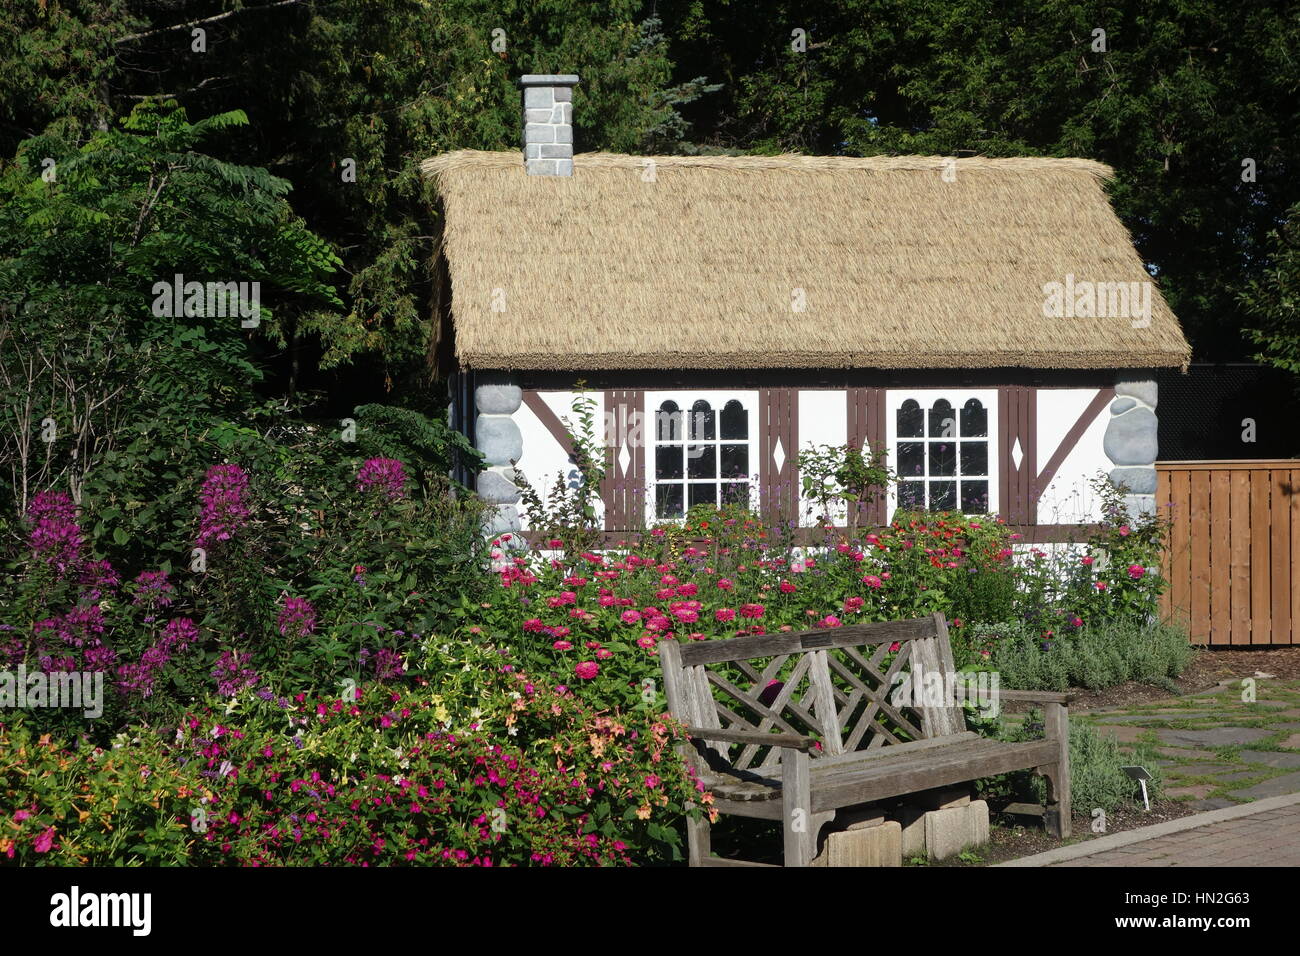 Tudor style English cottage with thatch roof in garden setting. Stock Photo